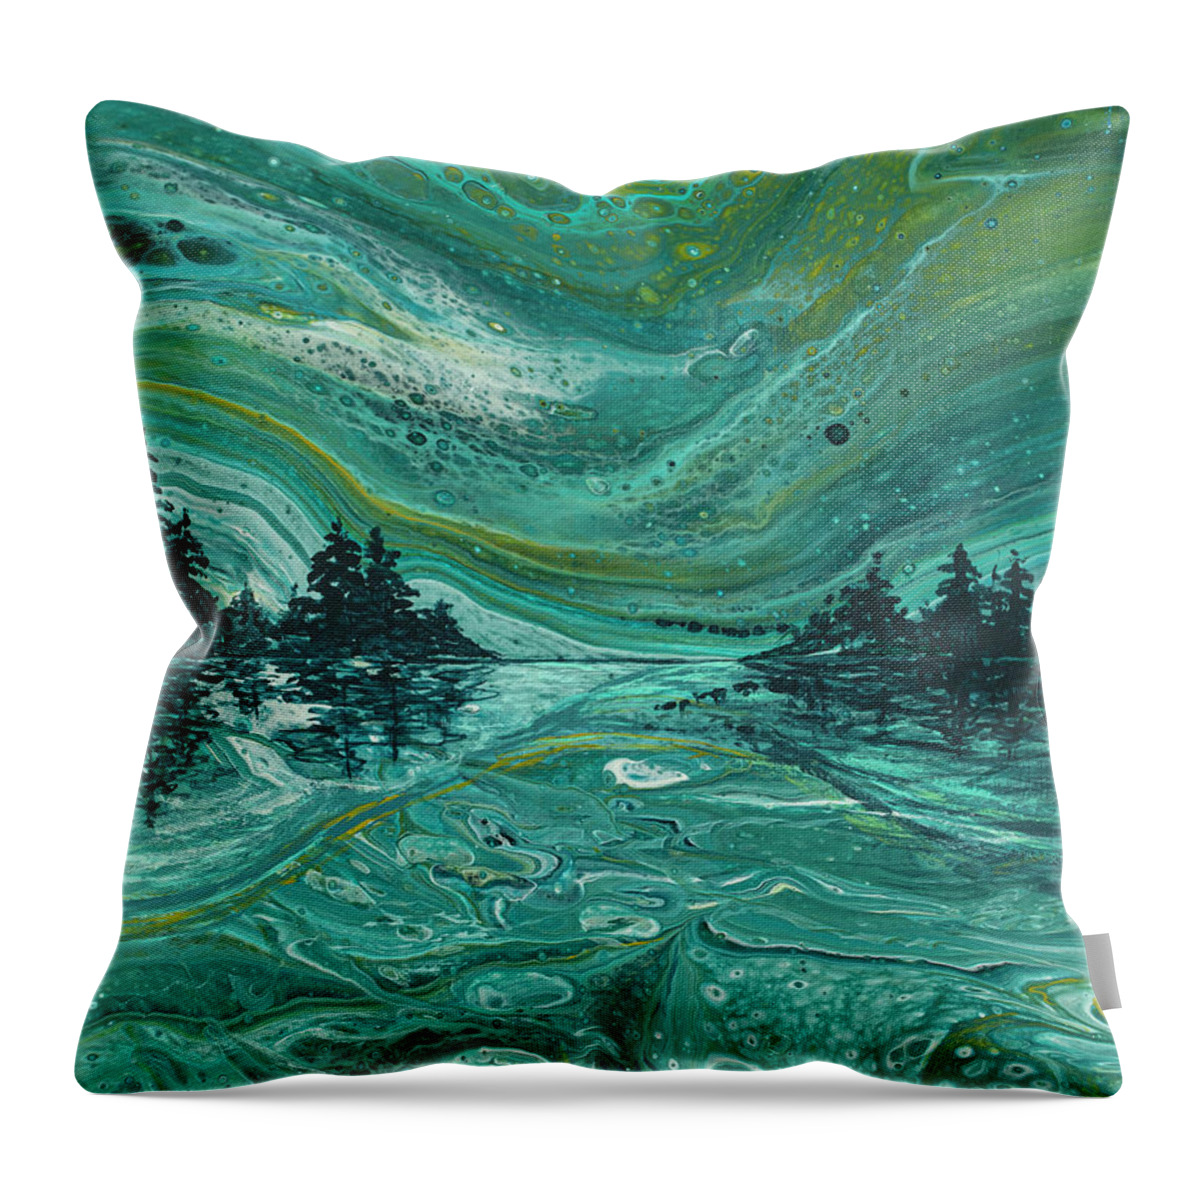 Abstract Throw Pillow featuring the painting Aurora Borealis Treescape by Darice Machel McGuire